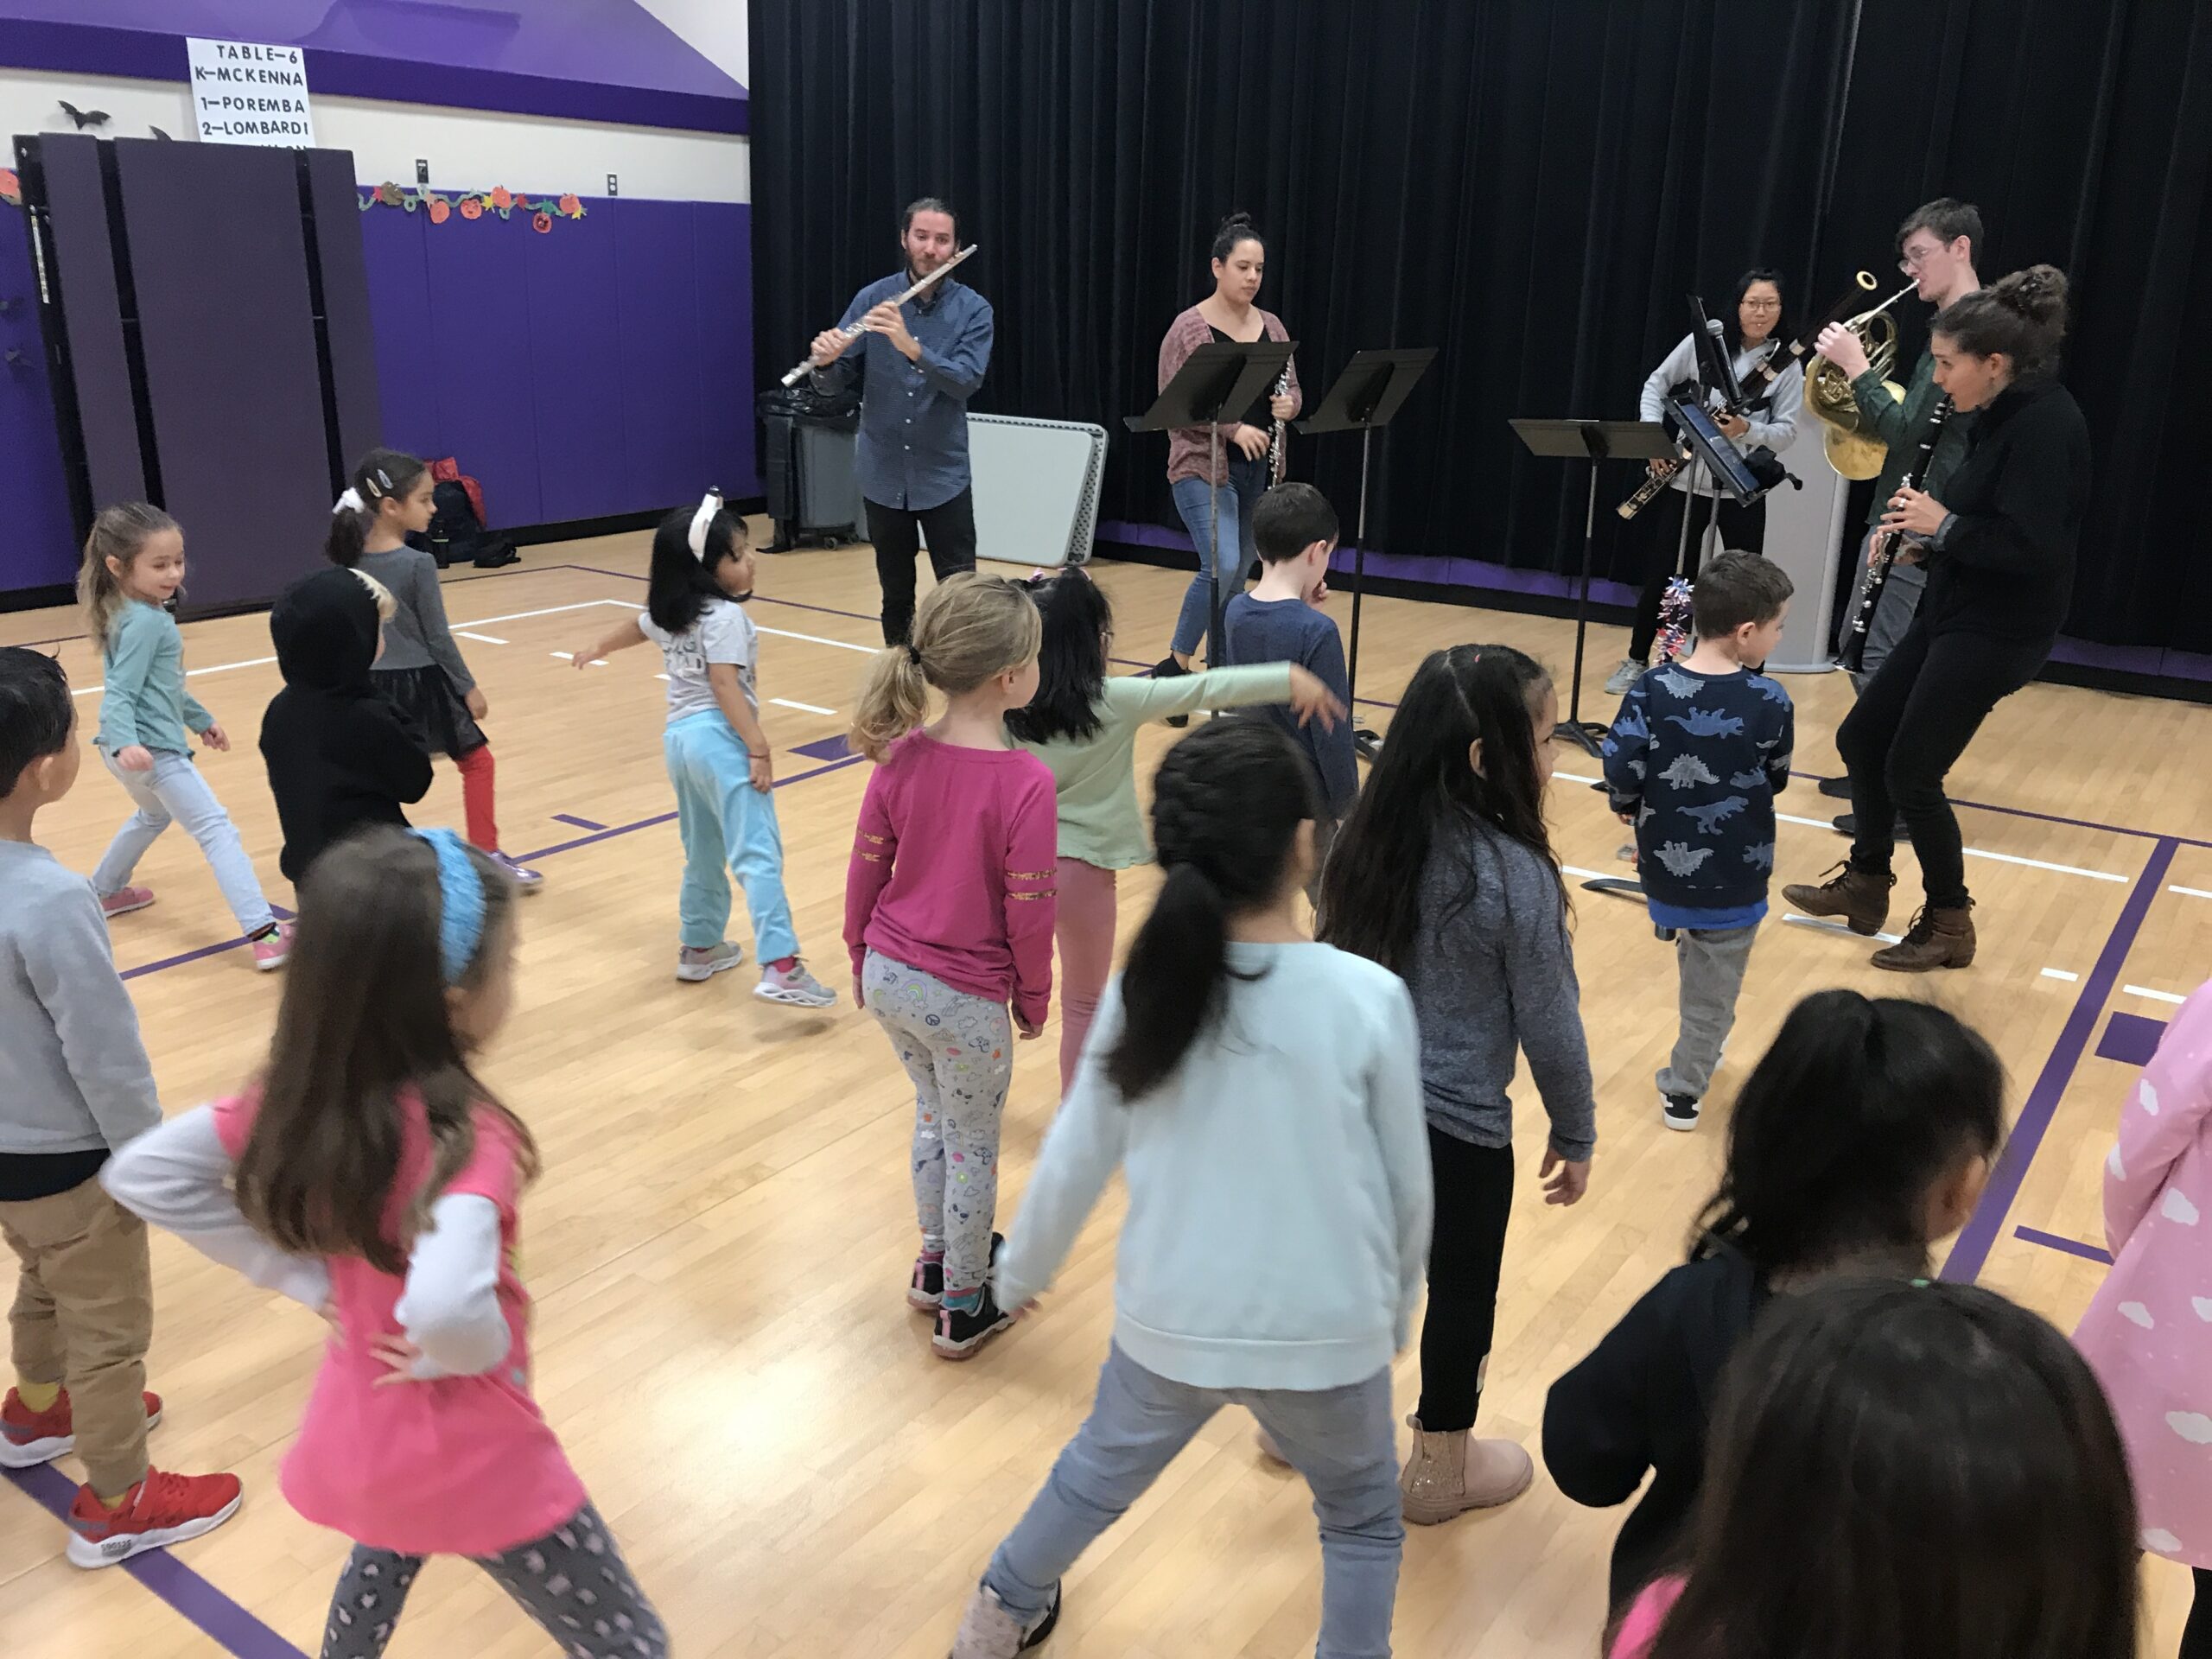 Hampton Bays Elementary School kindergartners recently received a special visit from ConnectFive, a wind quintet focused on music education. The students interacted with the music to hear and move with different tempos and meters. The program was organized by Quogue Chamber Music and  funded by grants. COURTESY HAMPTON BAYS SCHOOL DISTRICT